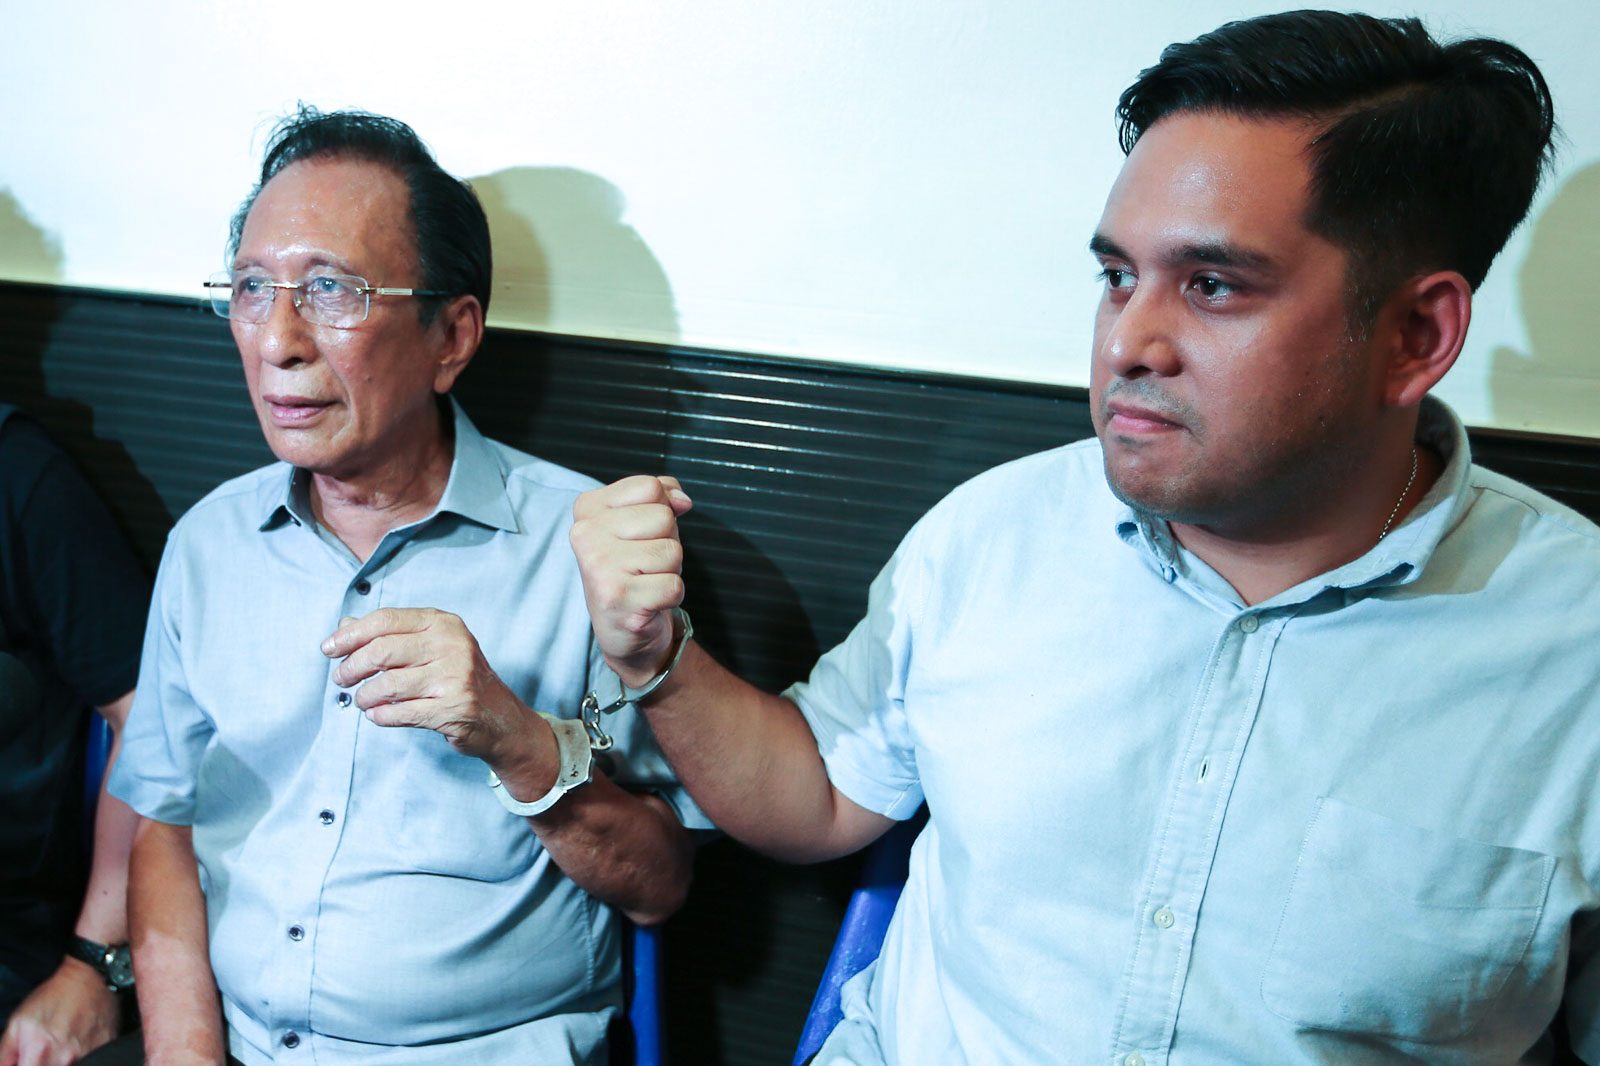 VOTE BUYING? Quezon City mayoral candidate Bingbong Crisologo (left) is arrested for alleged obstruction of justice in relation to alleged vote buying on May 12, 2019. Photo by Jire Carreon/Rappler.  